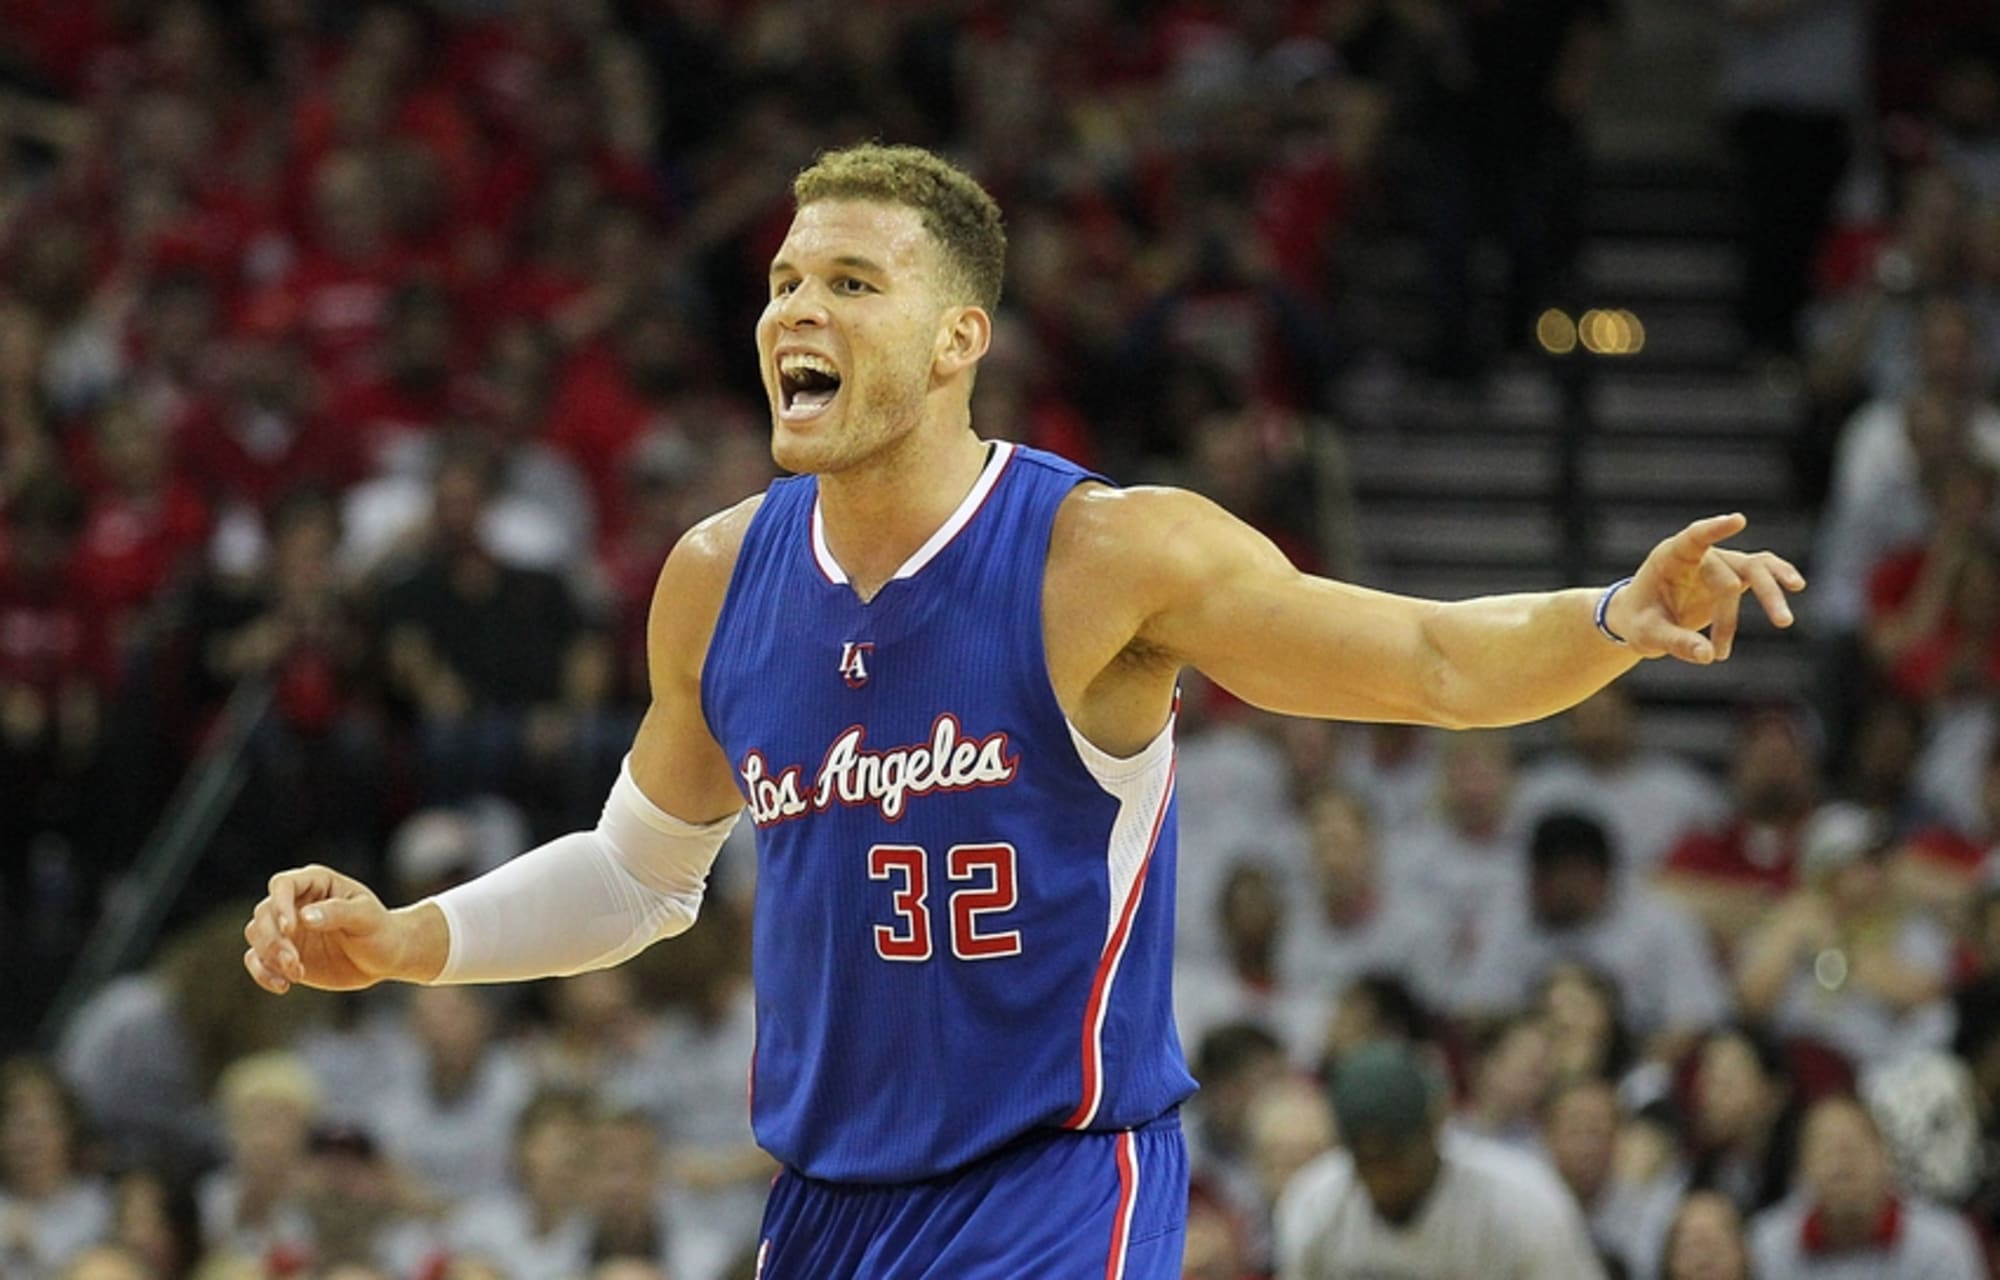 Blake Griffin has been the best player in the NBA this postseason